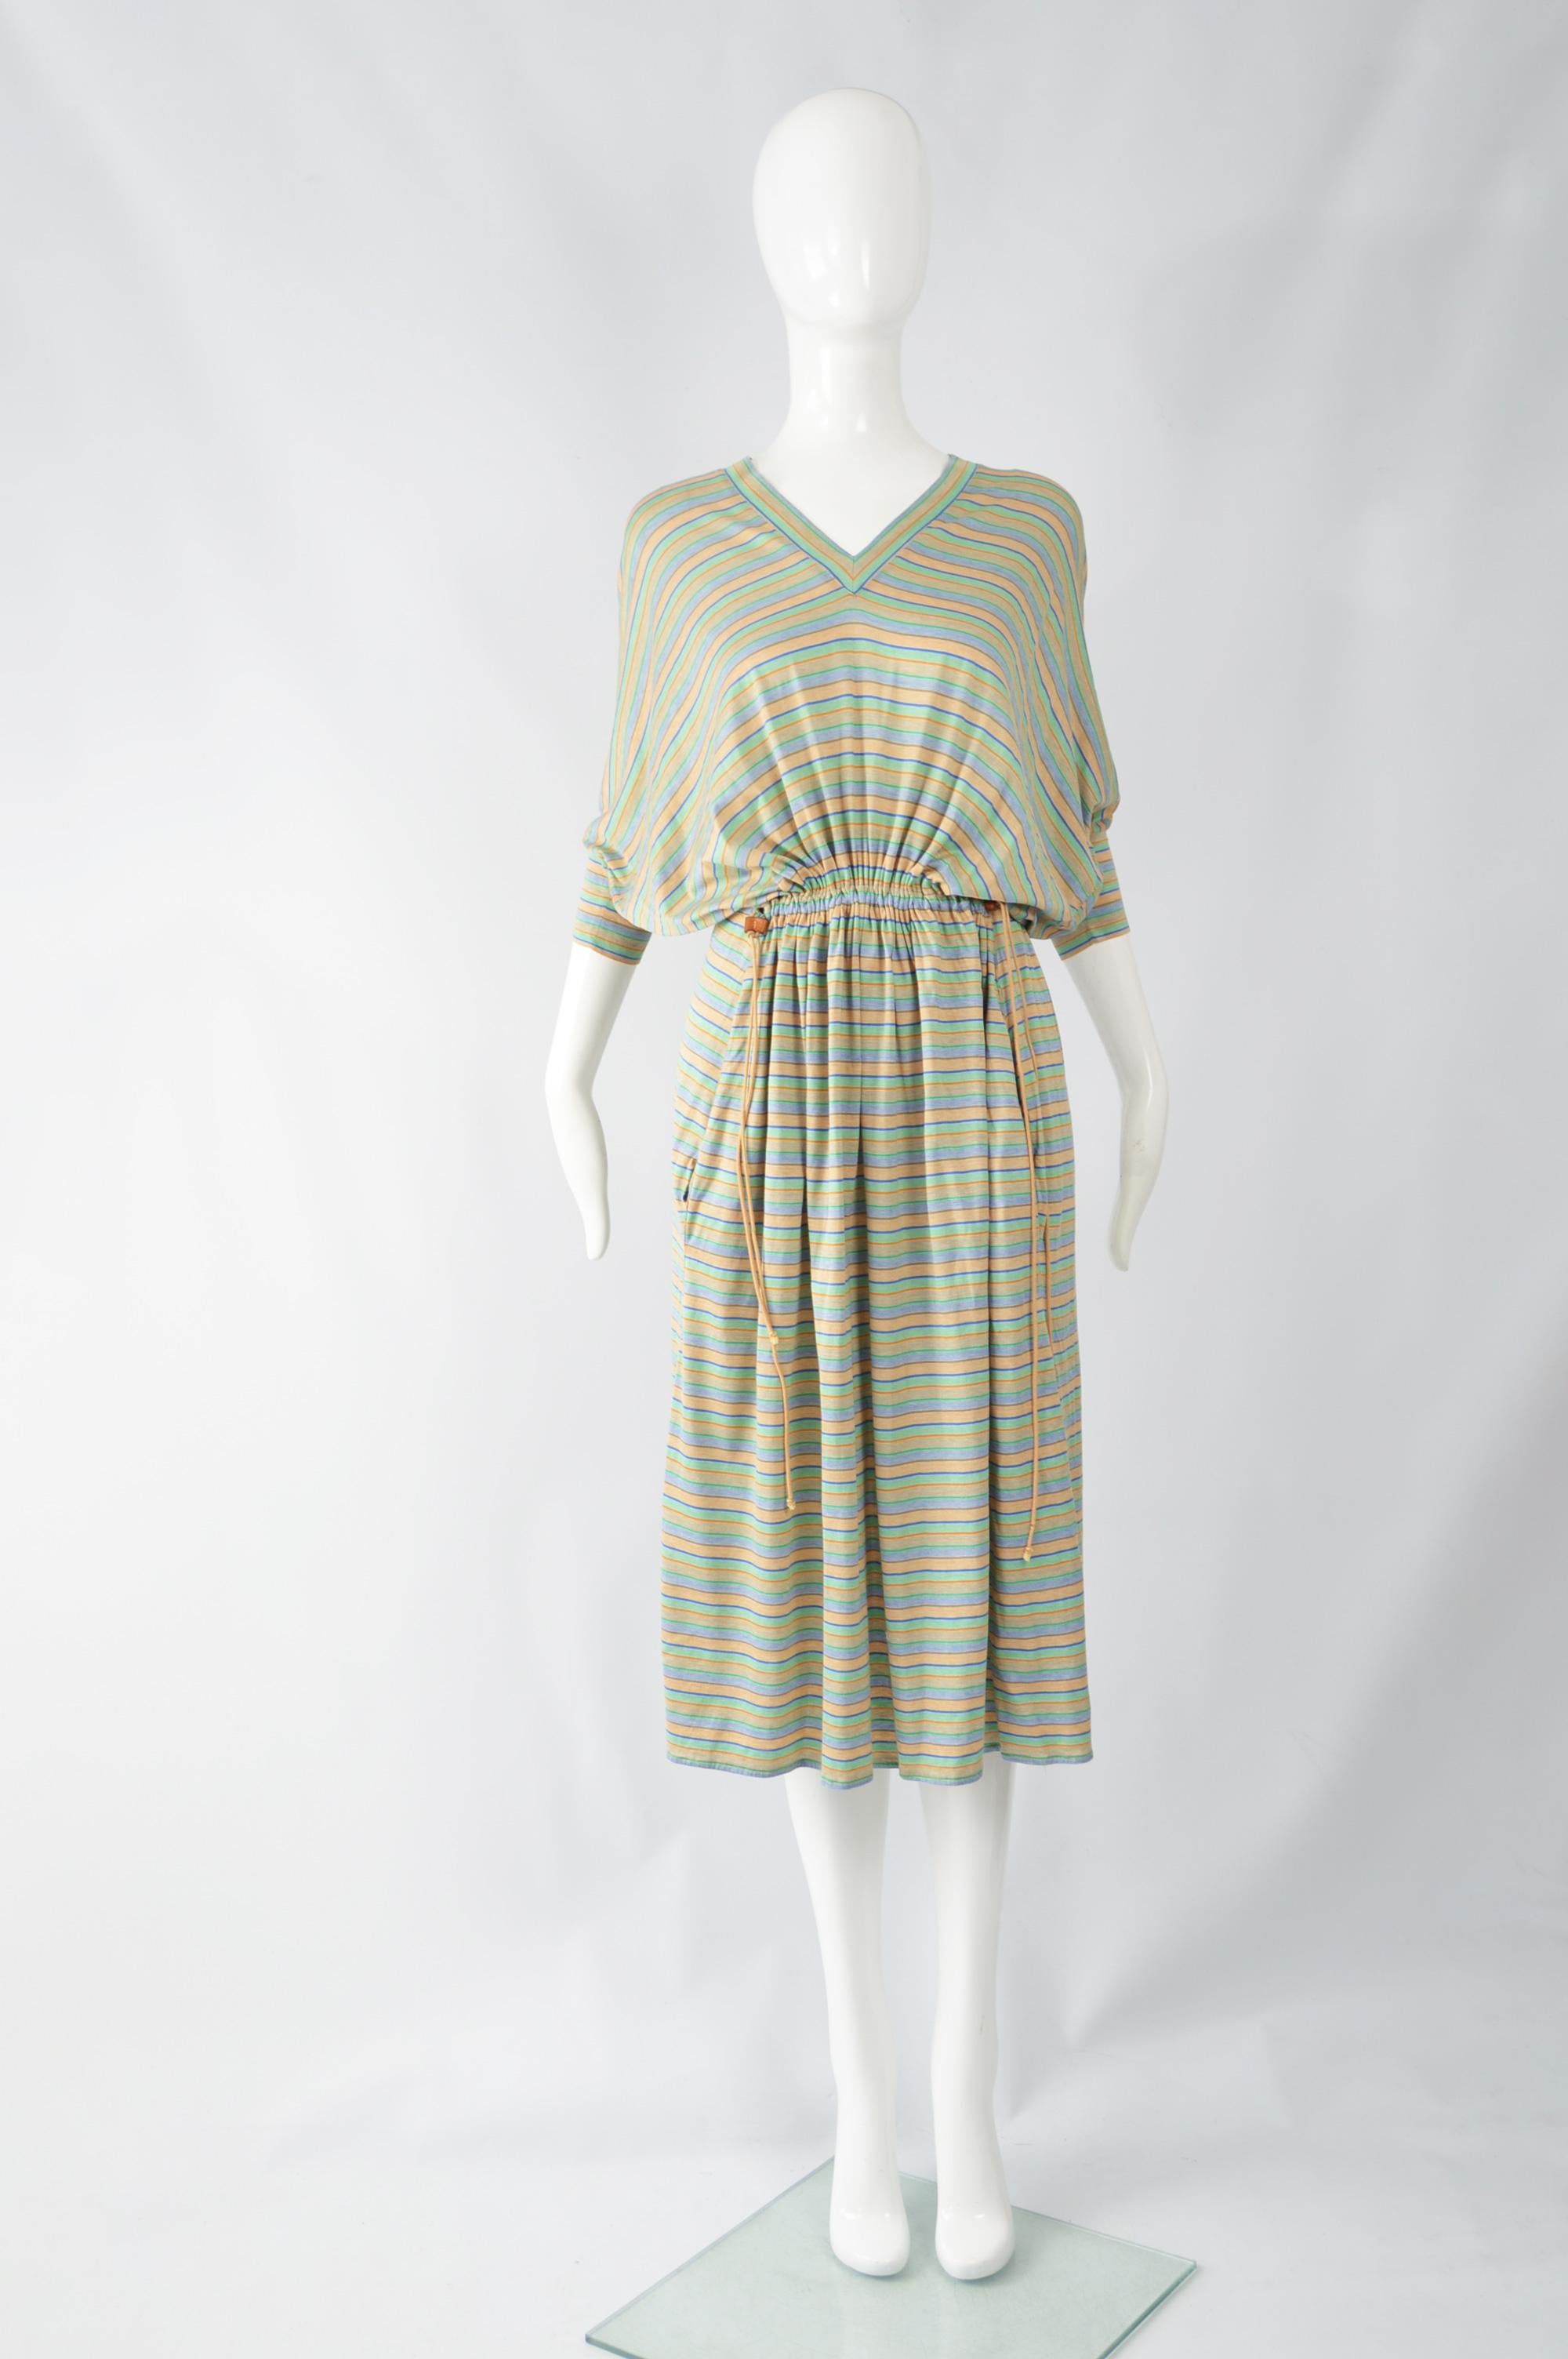 A chic and casual vintage women's dress from the mid to late 70s by iconic Italian fashion house Byblos (who Gianni Versace was head designer for in the 1970s, before starting his own label). In a casual, striped knit jersey with batwing details and